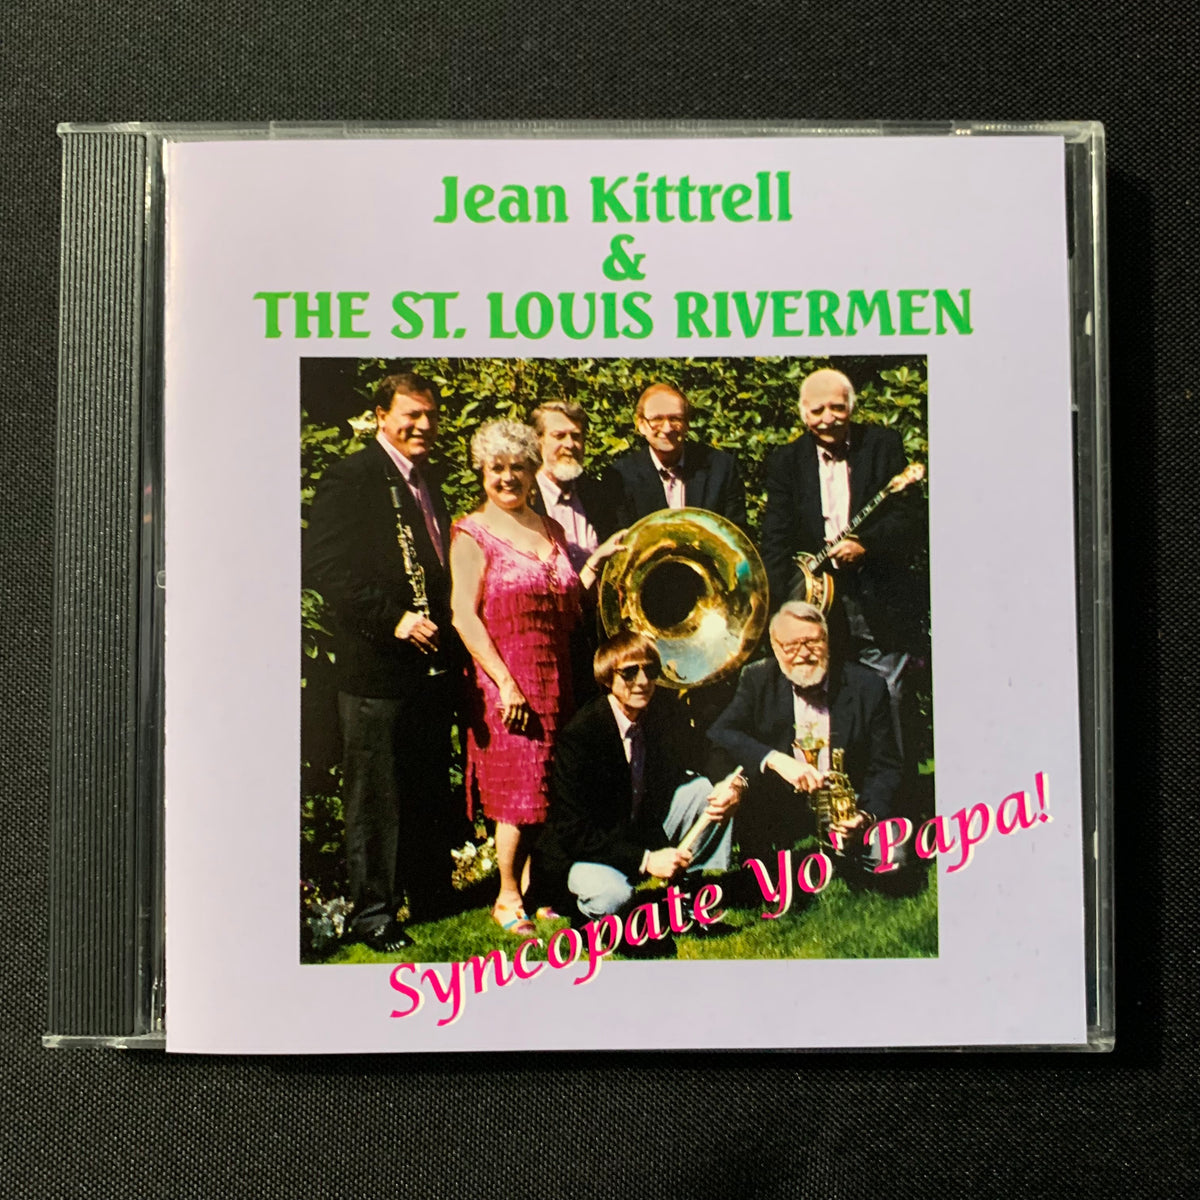 CD Jean Kittrell and the St. Louis Rivermen 'Syncopate Yo Papa!' (1995 –  The Exile Media and Trading Co.